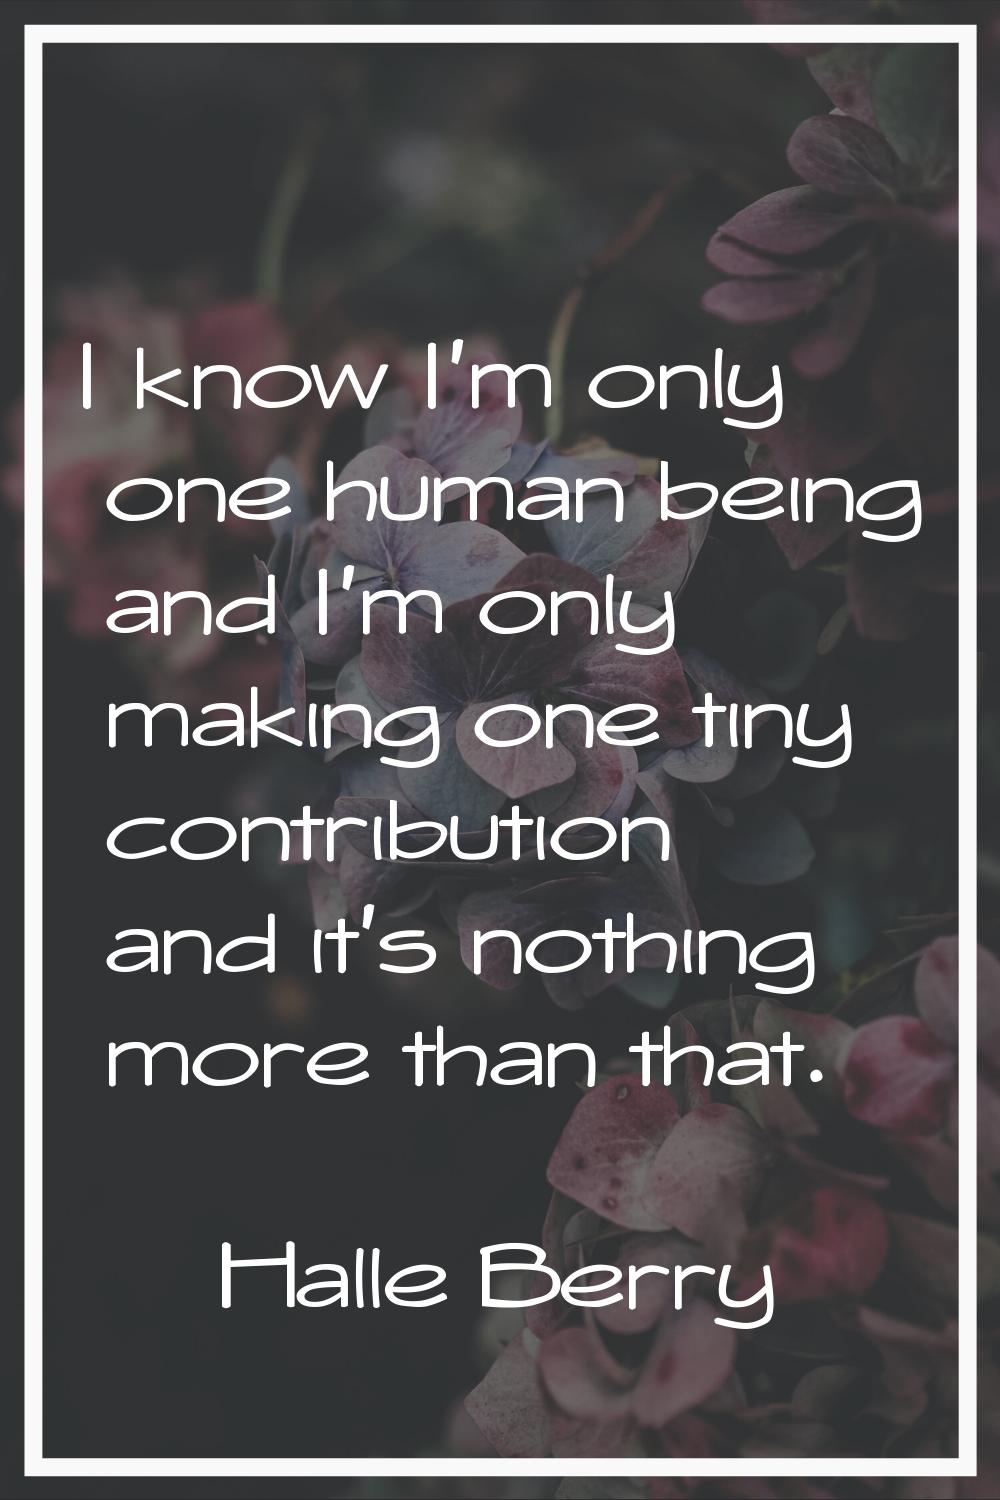 I know I'm only one human being and I'm only making one tiny contribution and it's nothing more tha